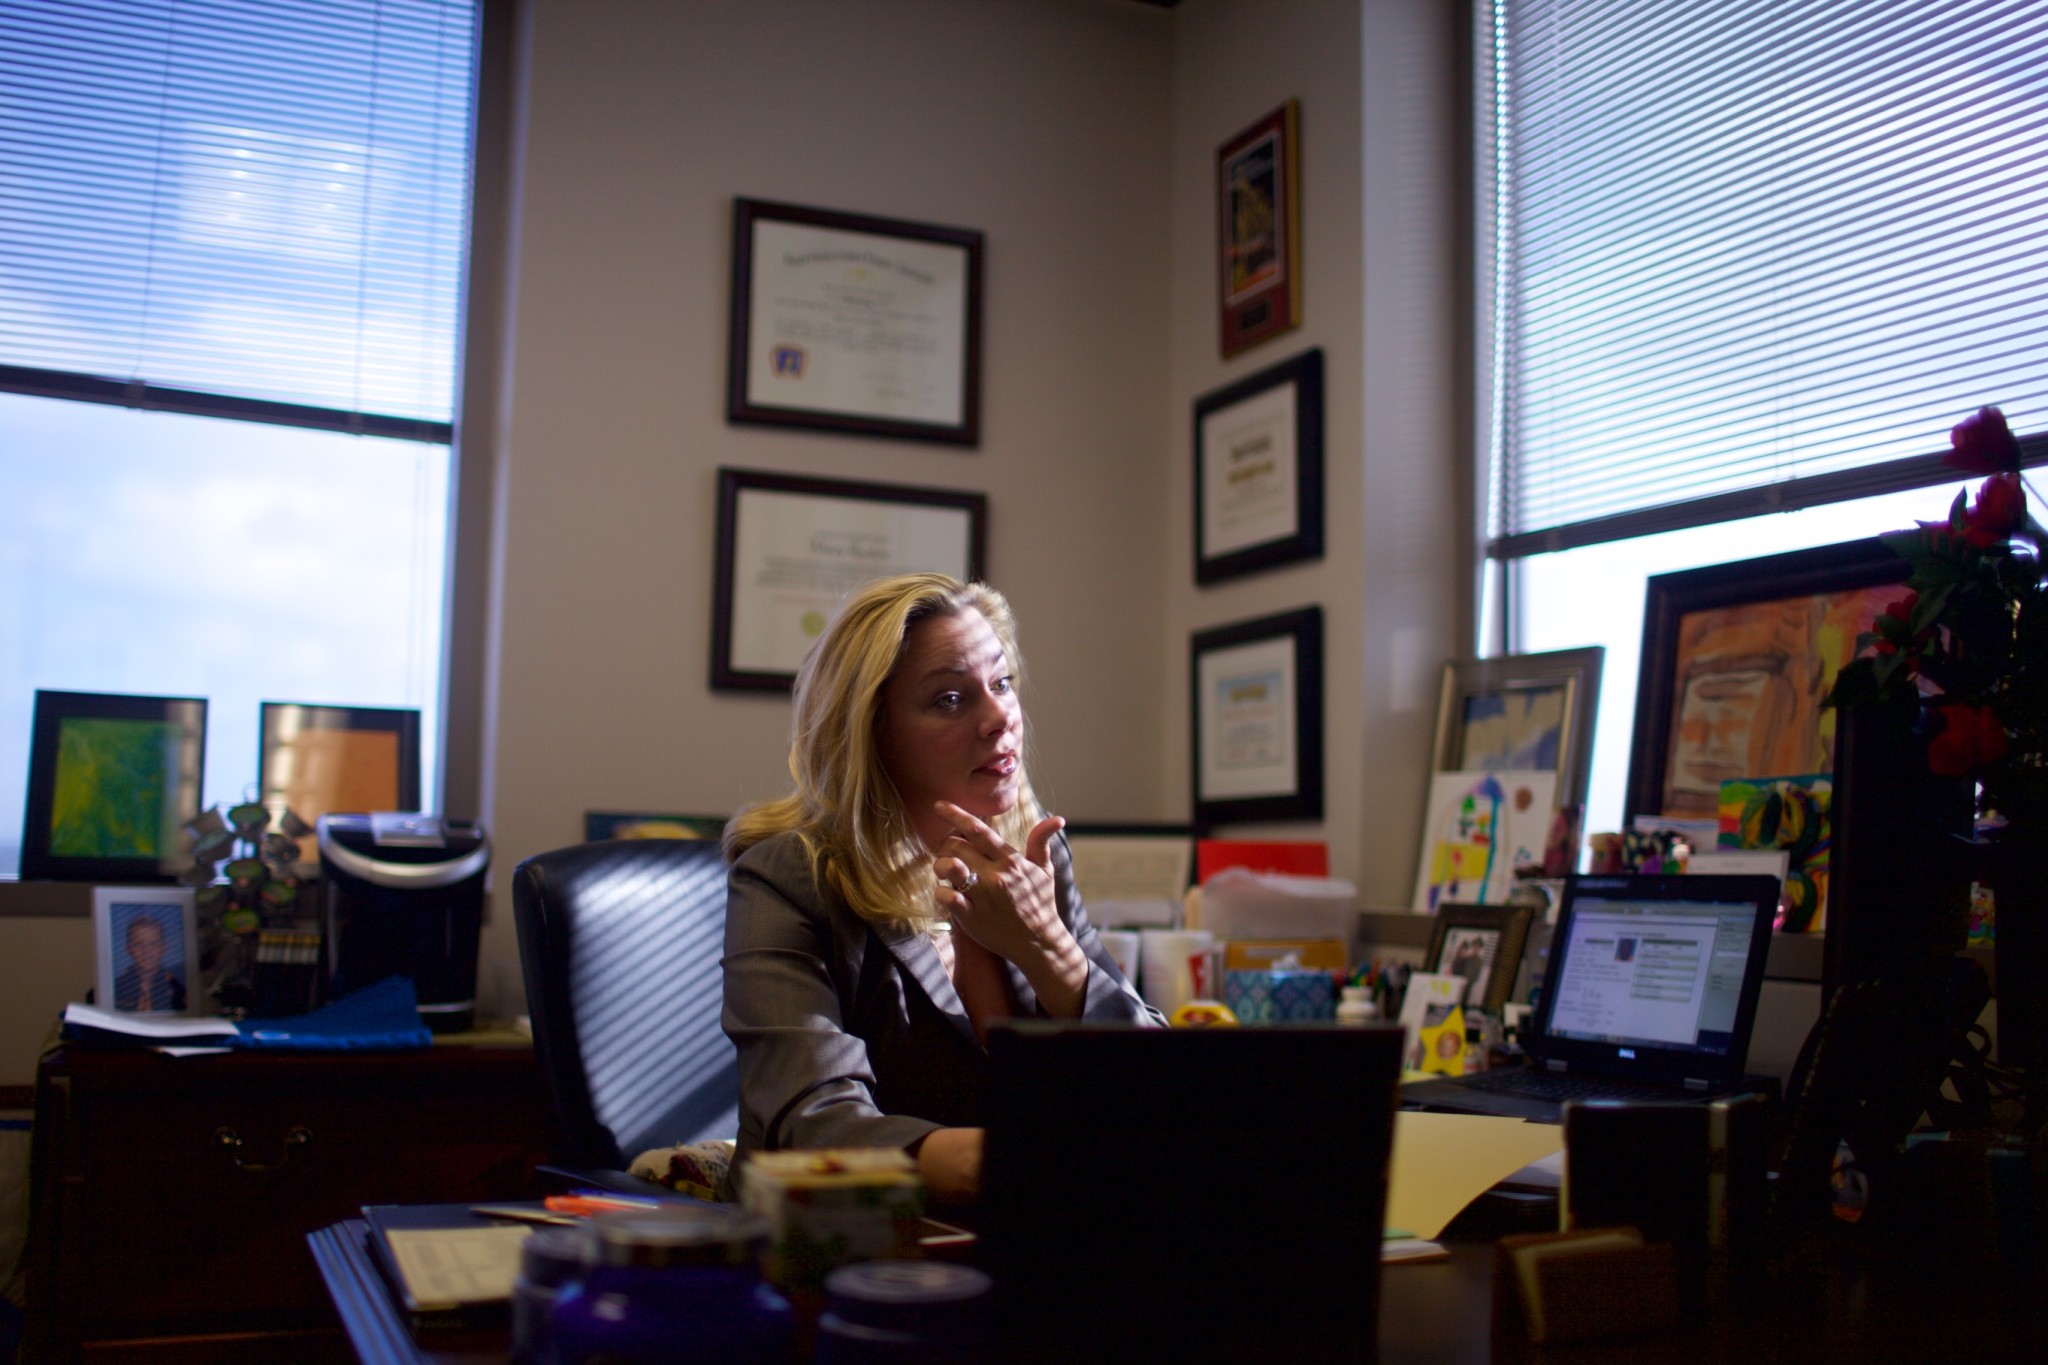 Harris County Public Defender Mary Grace Ruden at work in downtown Houston, November 5, 2015.